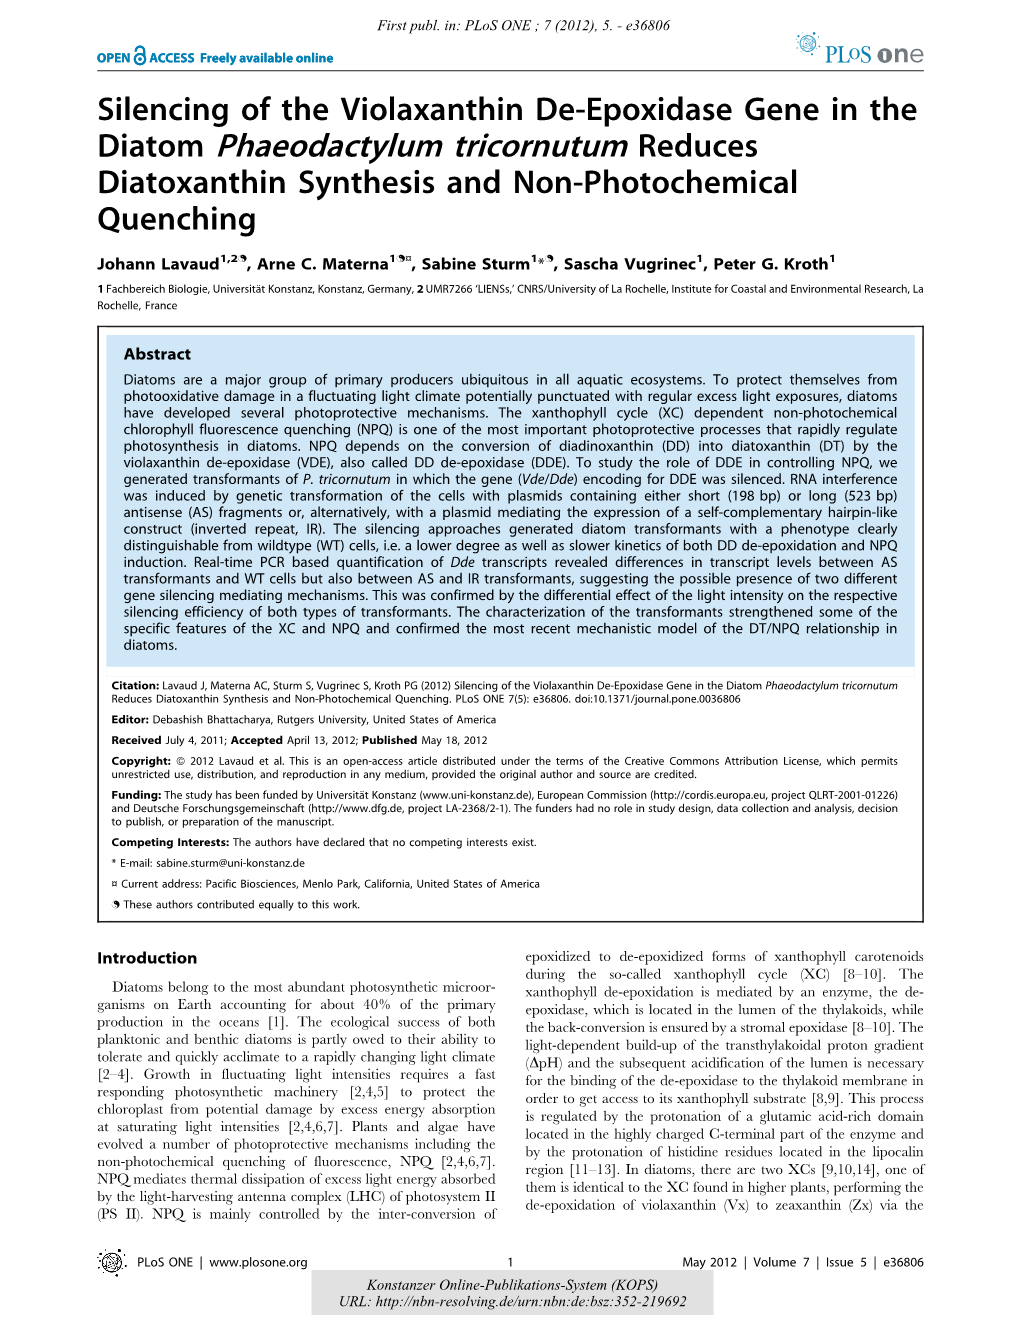 Silencing of the Violaxanthin De-Epoxidase Gene in the Diatom Phaeodactylum Tricornutum Reduces Diatoxanthin Synthesis and Non-Photochemical Quenching